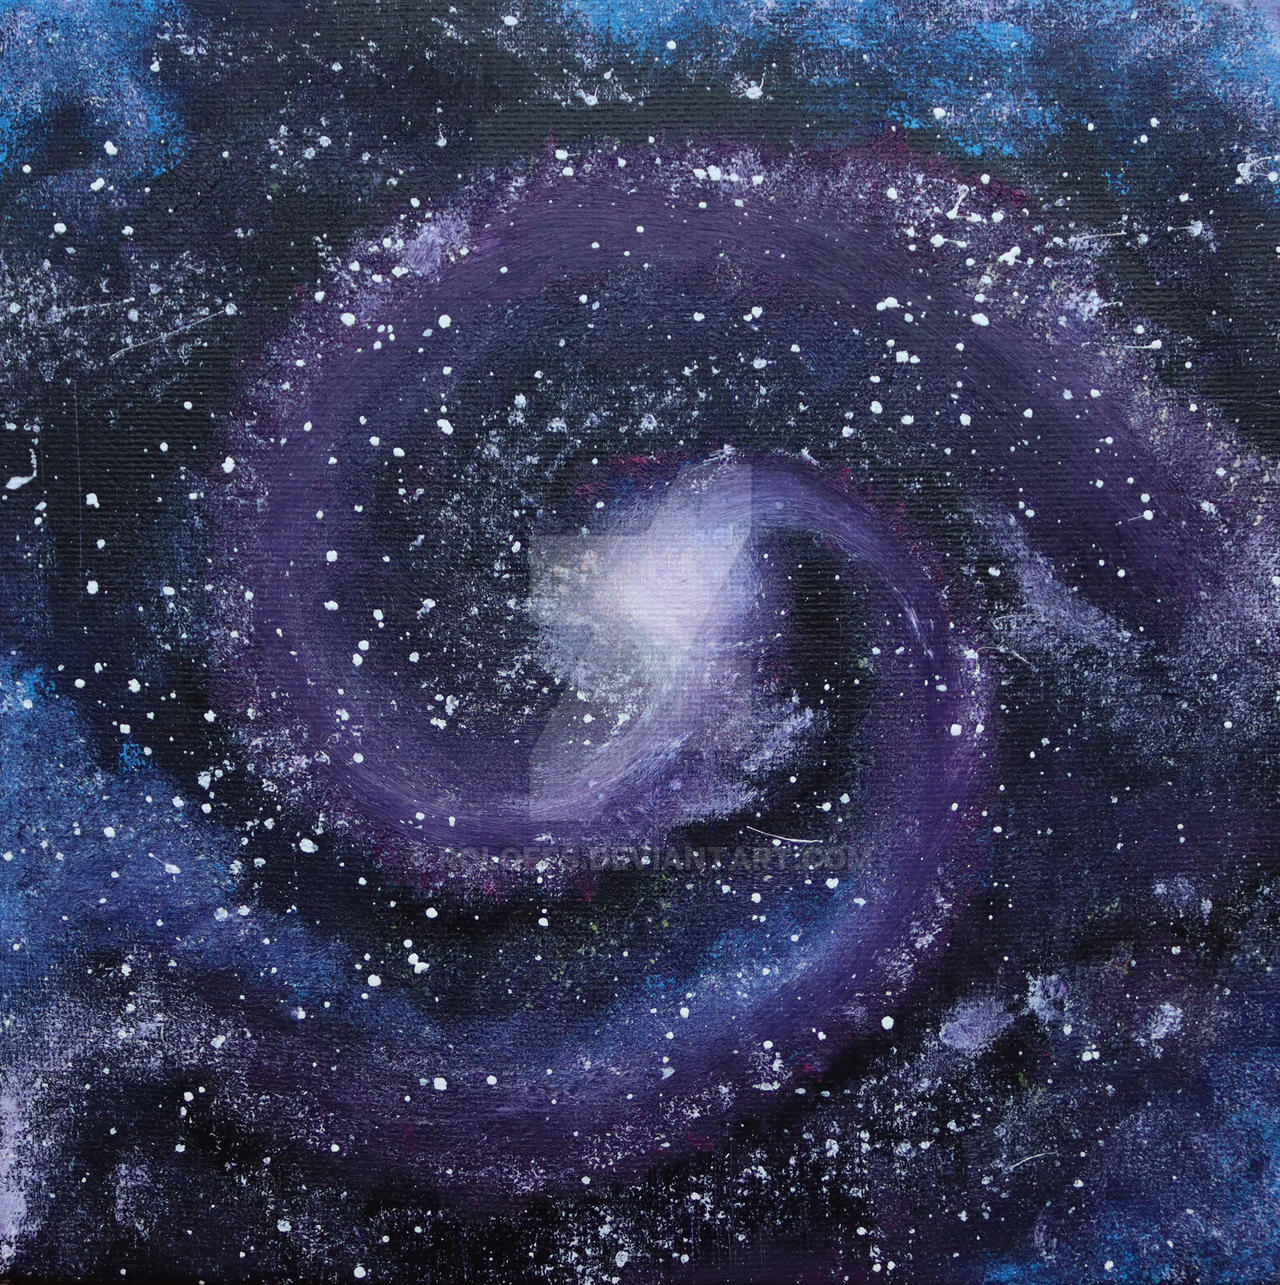 Galaxy, Universe, Stars, Acryl Painting on Canvas by Roloffs on DeviantArt